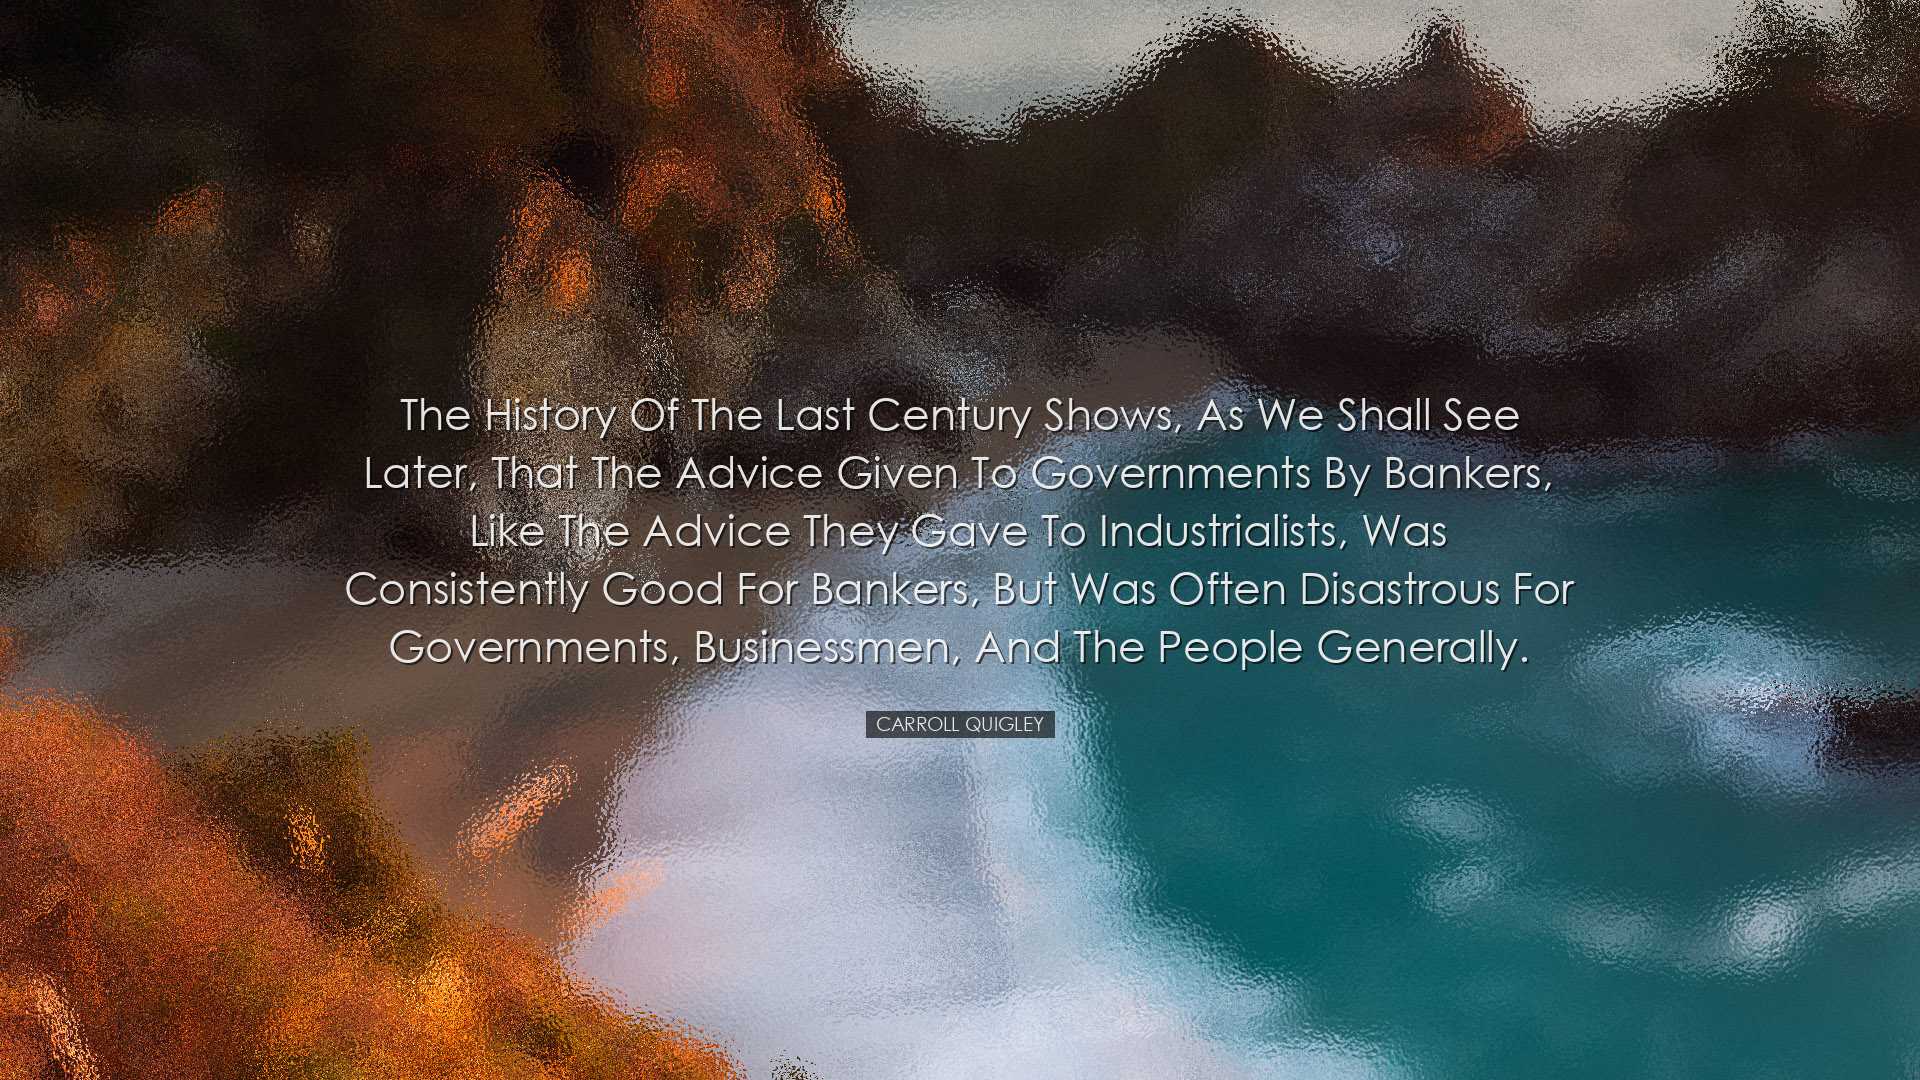 The history of the last century shows, as we shall see later, that